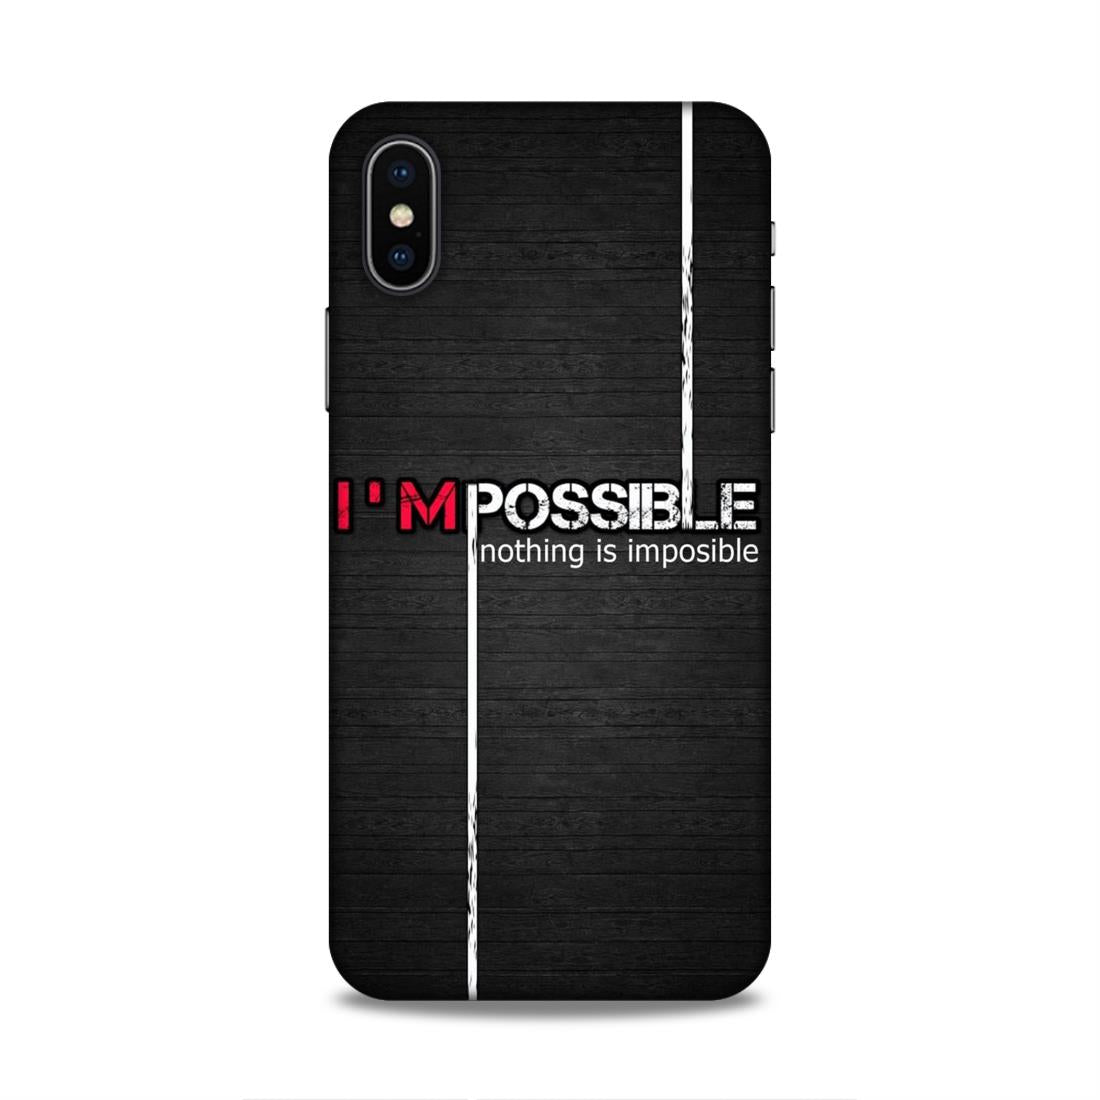 I'm Possible Hard Back Case For Apple iPhone X/XS